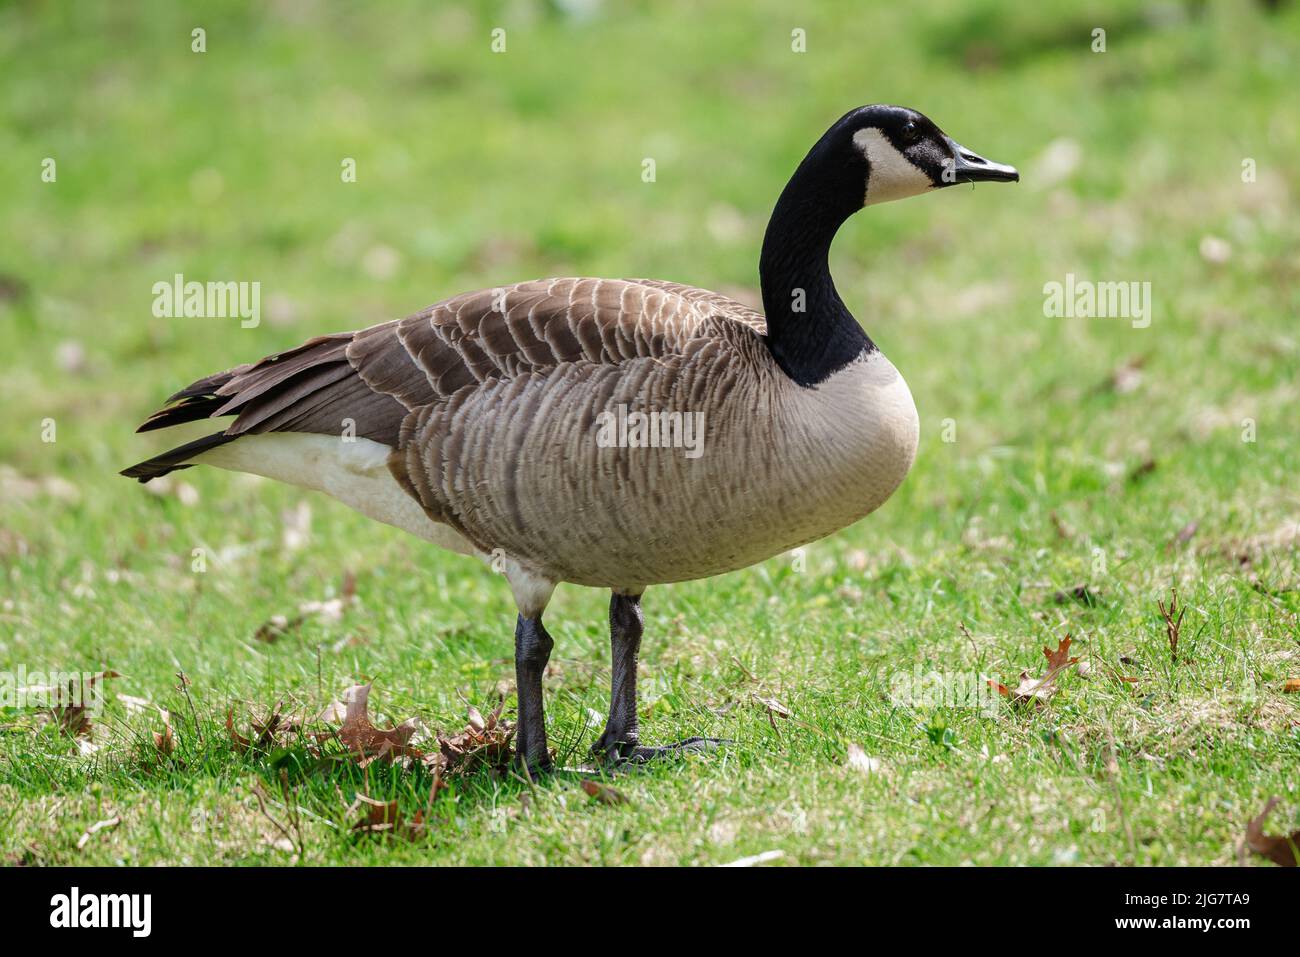 A closeup of a Canada goose (Branta canadensis) standing on the grass Stock Photo